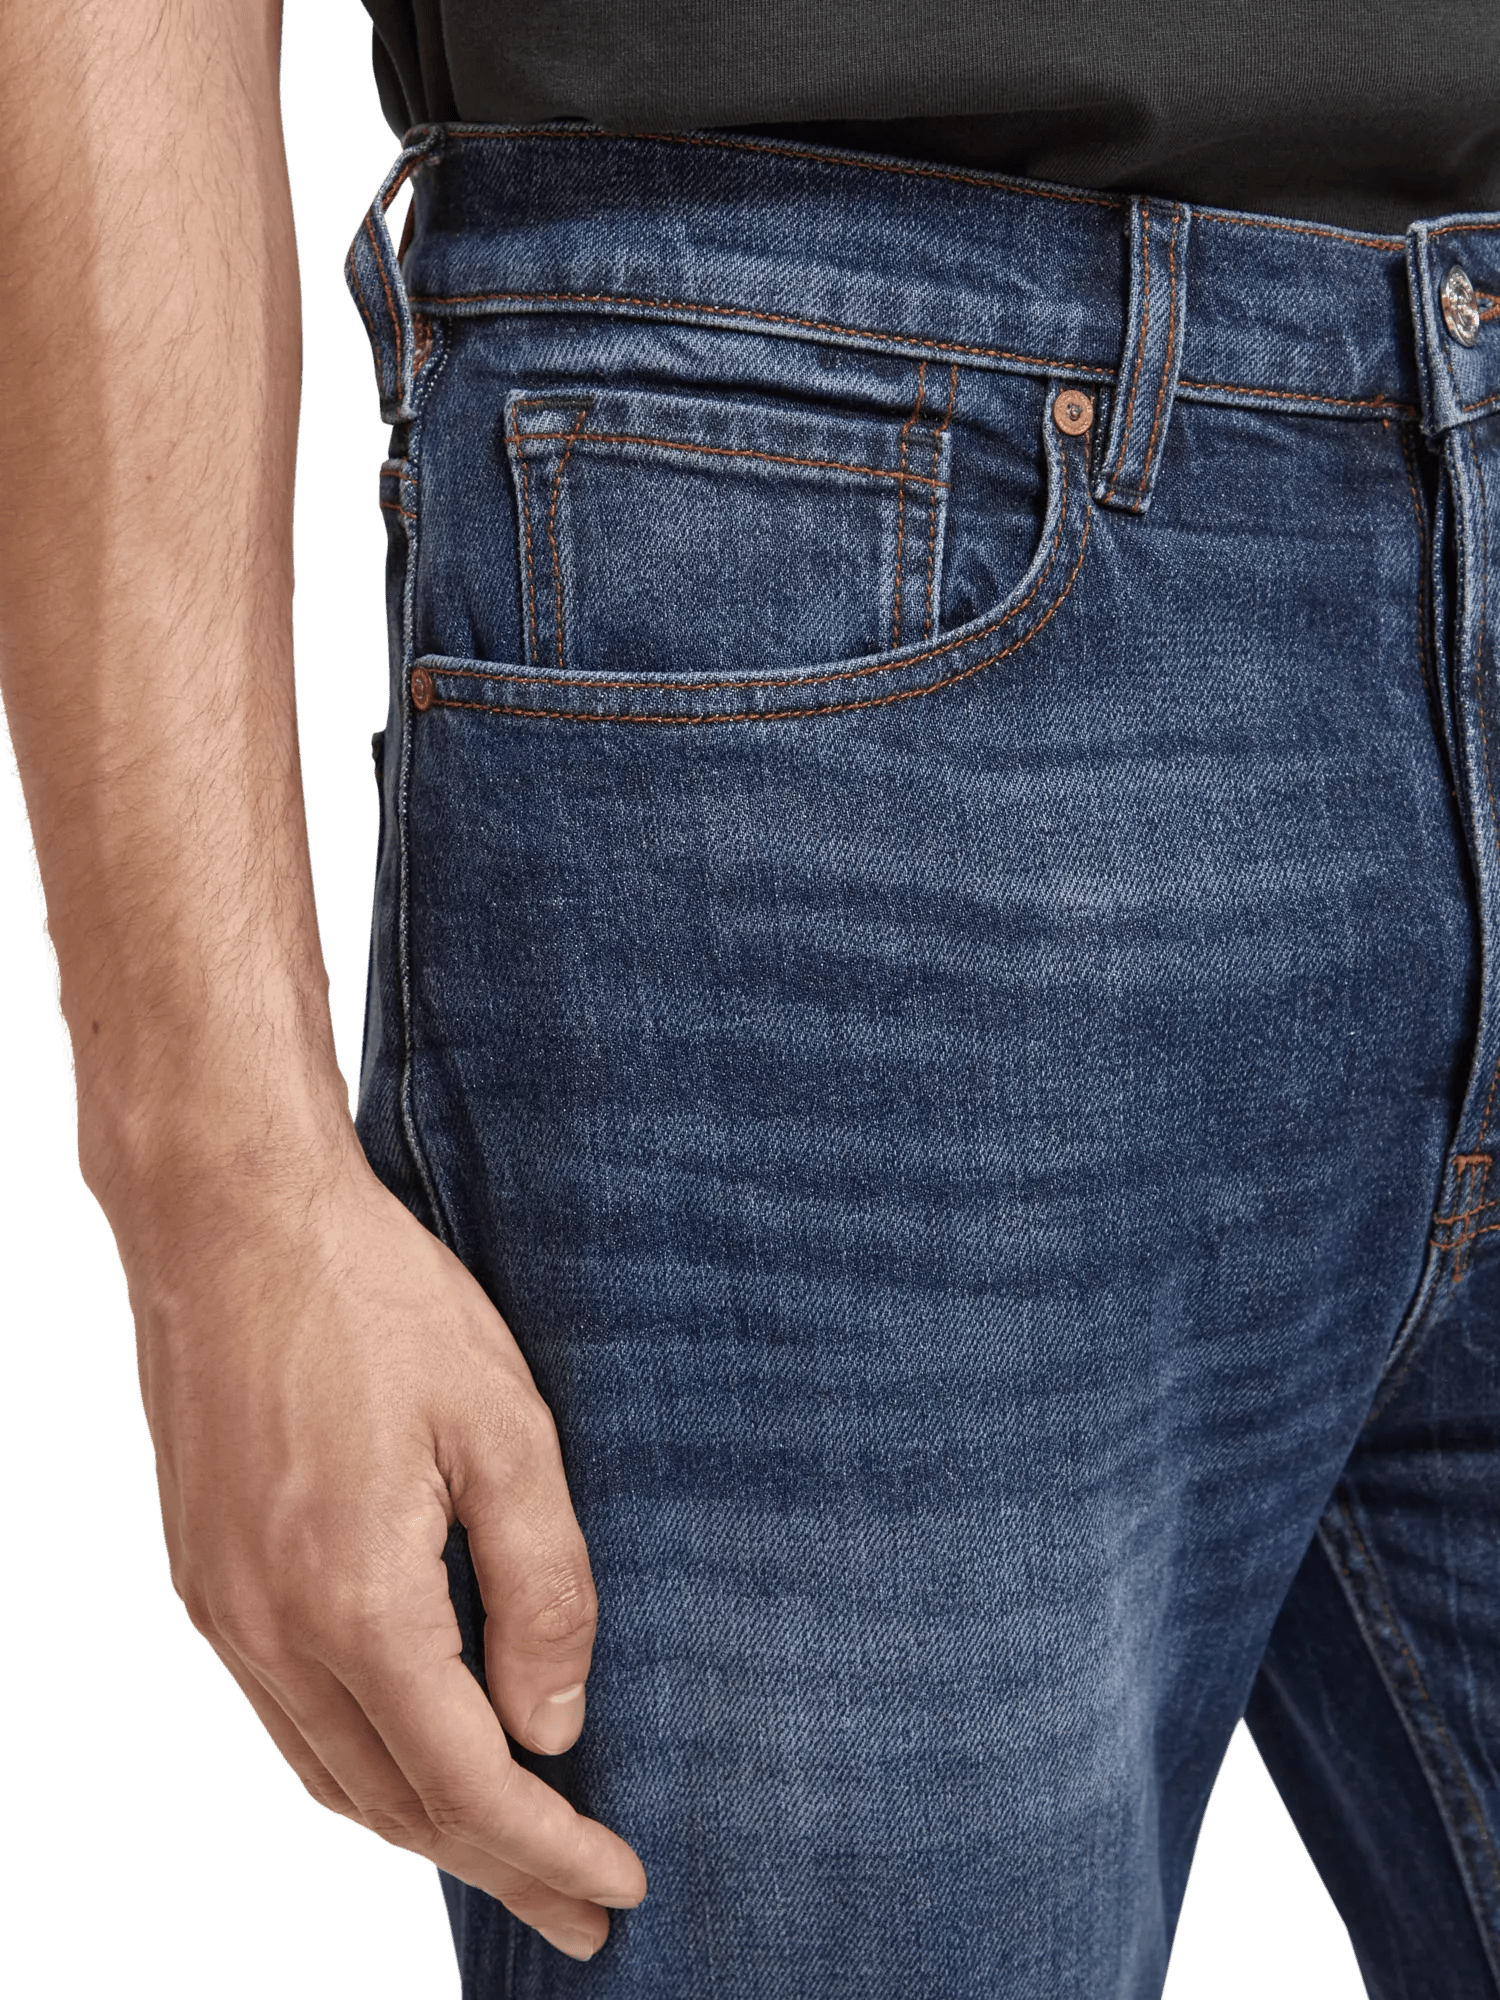 Scotch & Soda - The Drop Tapered Jean - Remixed